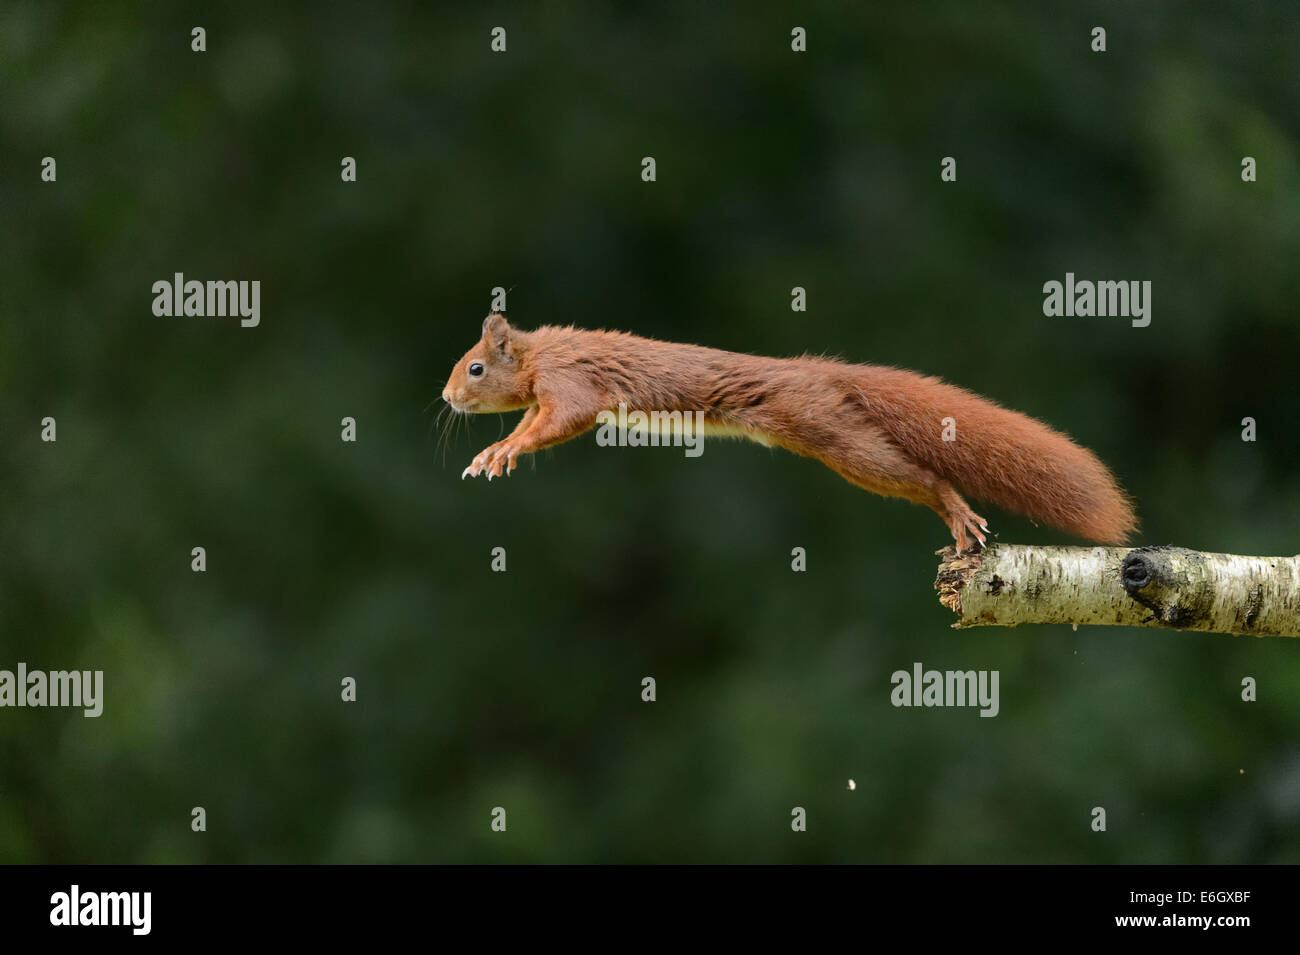 Red squirrel jumping Stock Photo